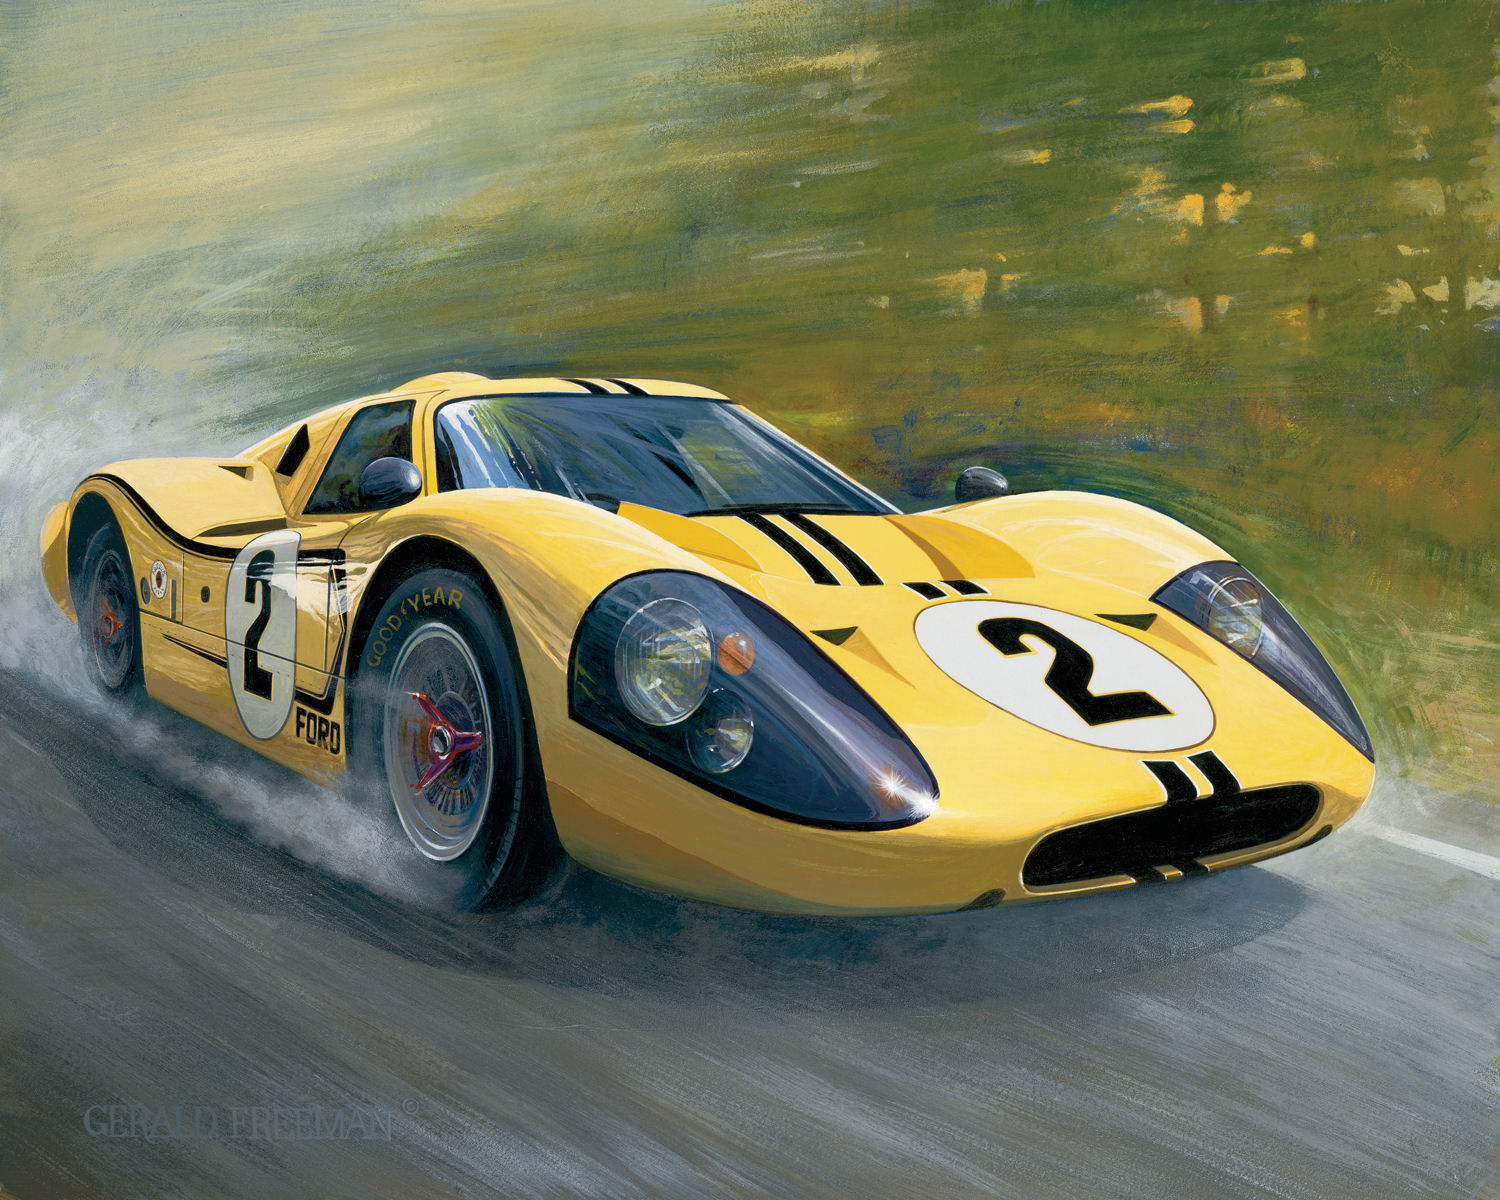 Ford GT40 MkIV